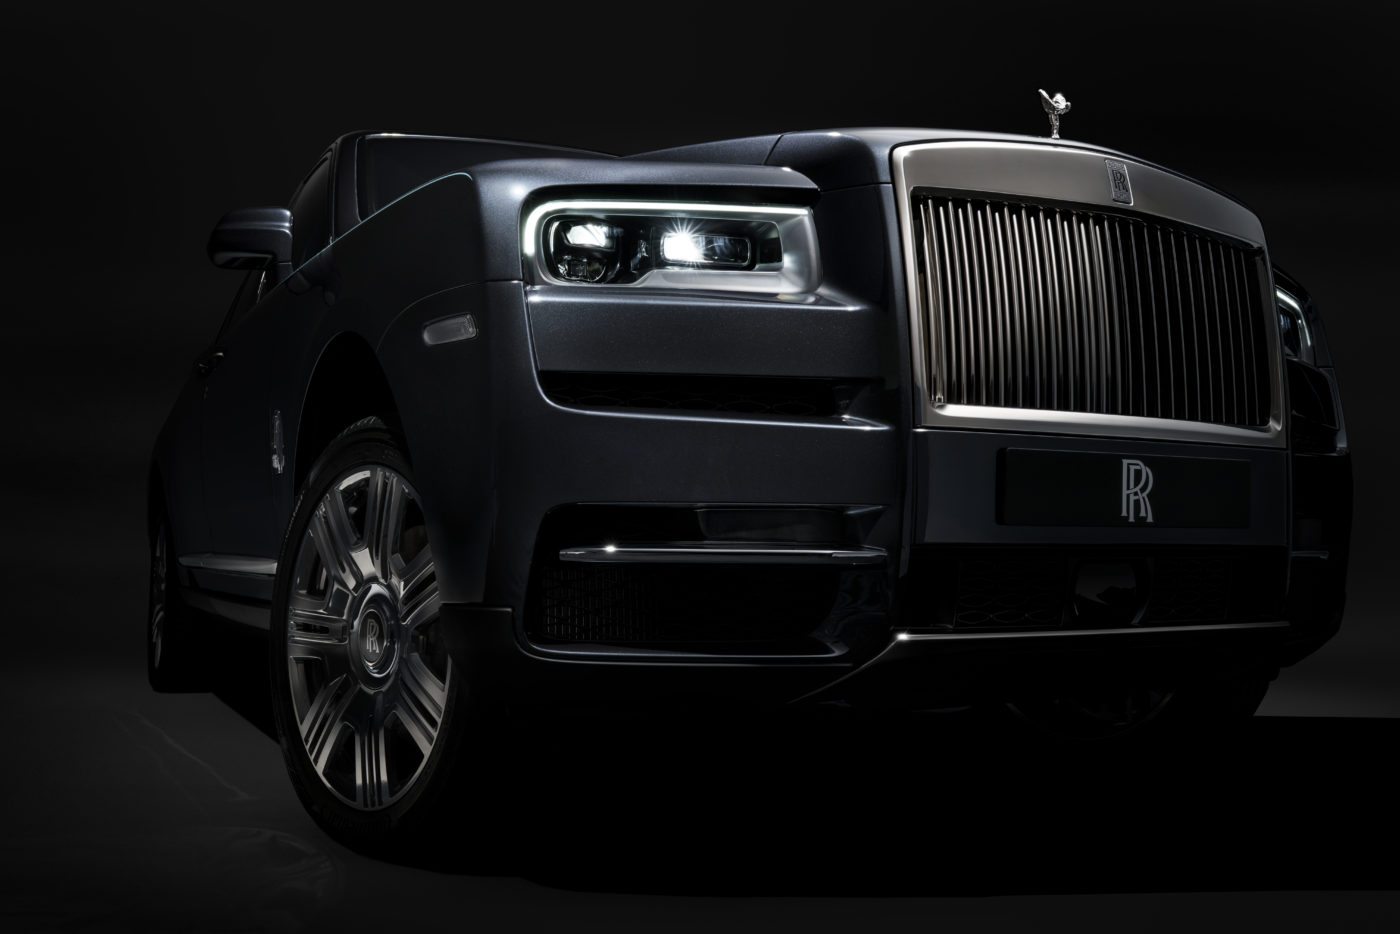 The Parthenon grille is the most visible feature of the Rolls-Royce Cullinan